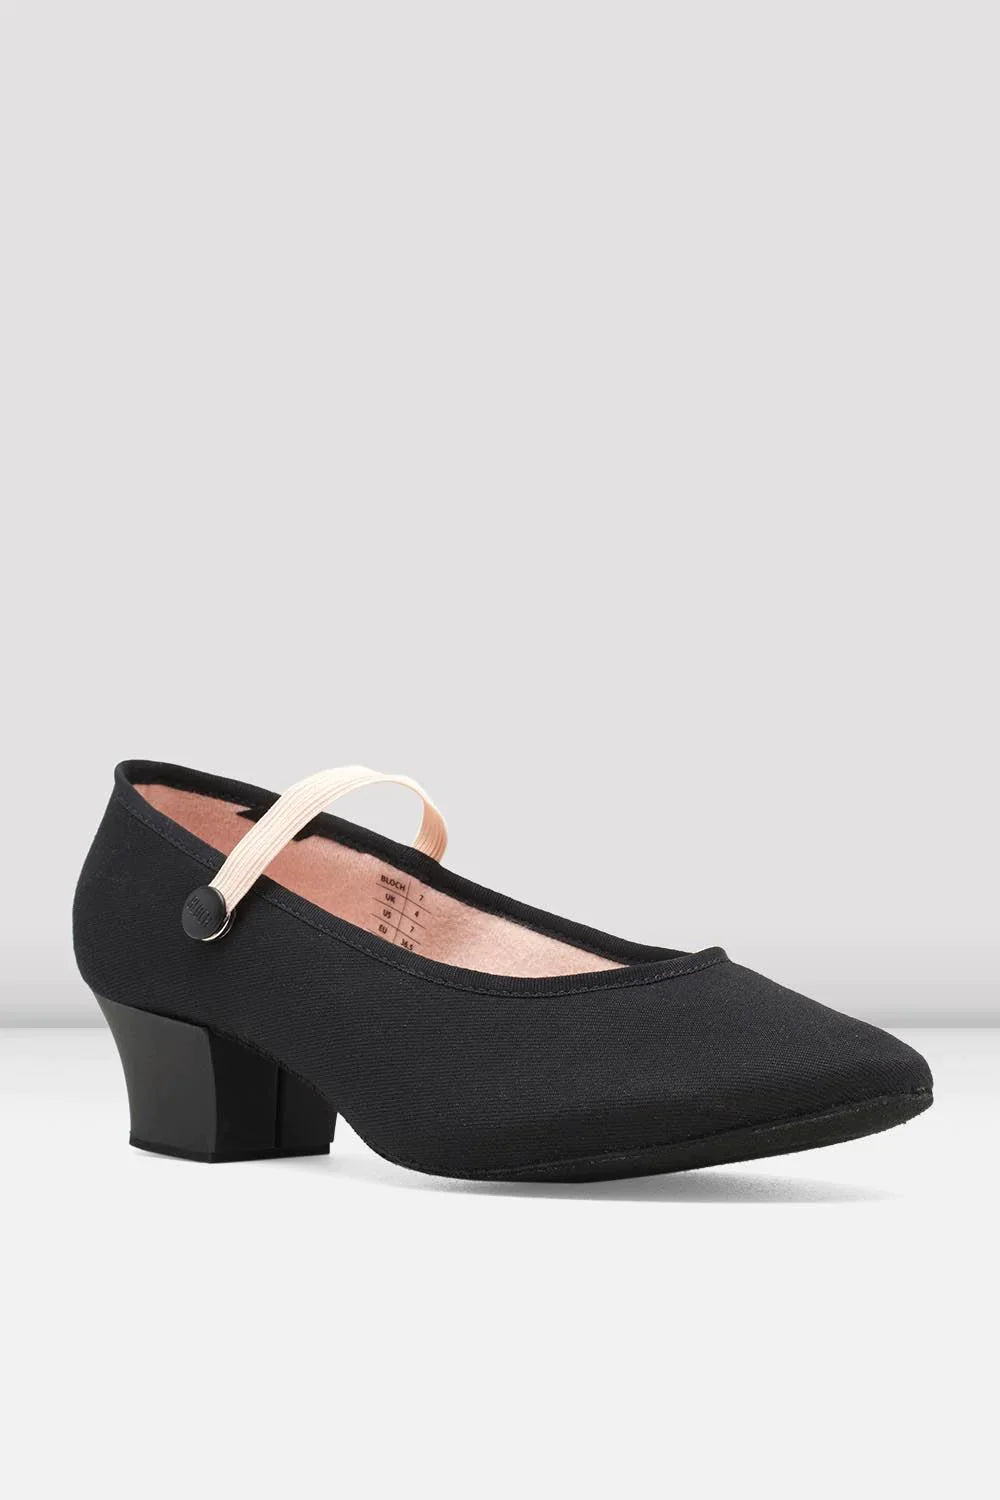 BLOCH TEMPO Adult Cuban Character Shoe